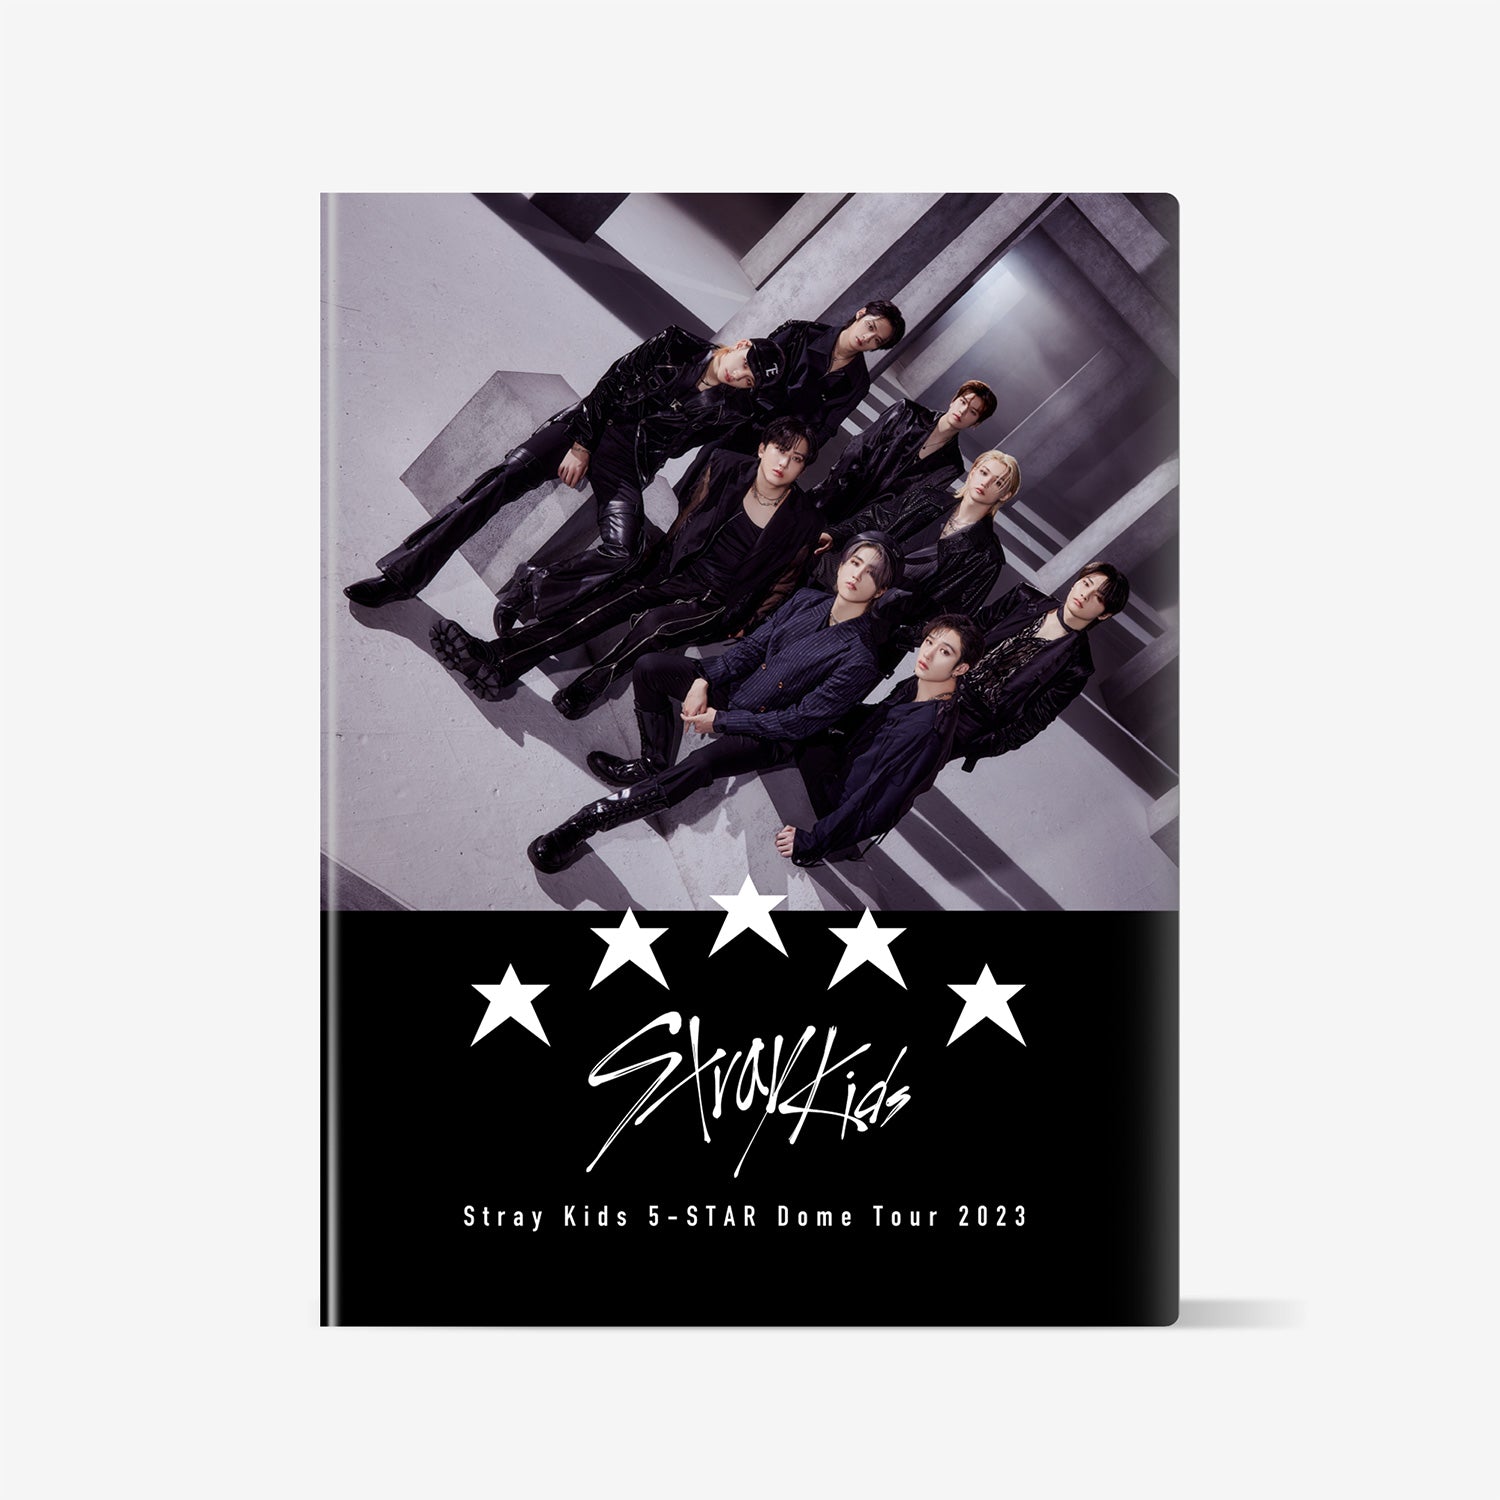 TRADING CARD CASE / Stray Kids『5-STAR Dome Tour 2023』